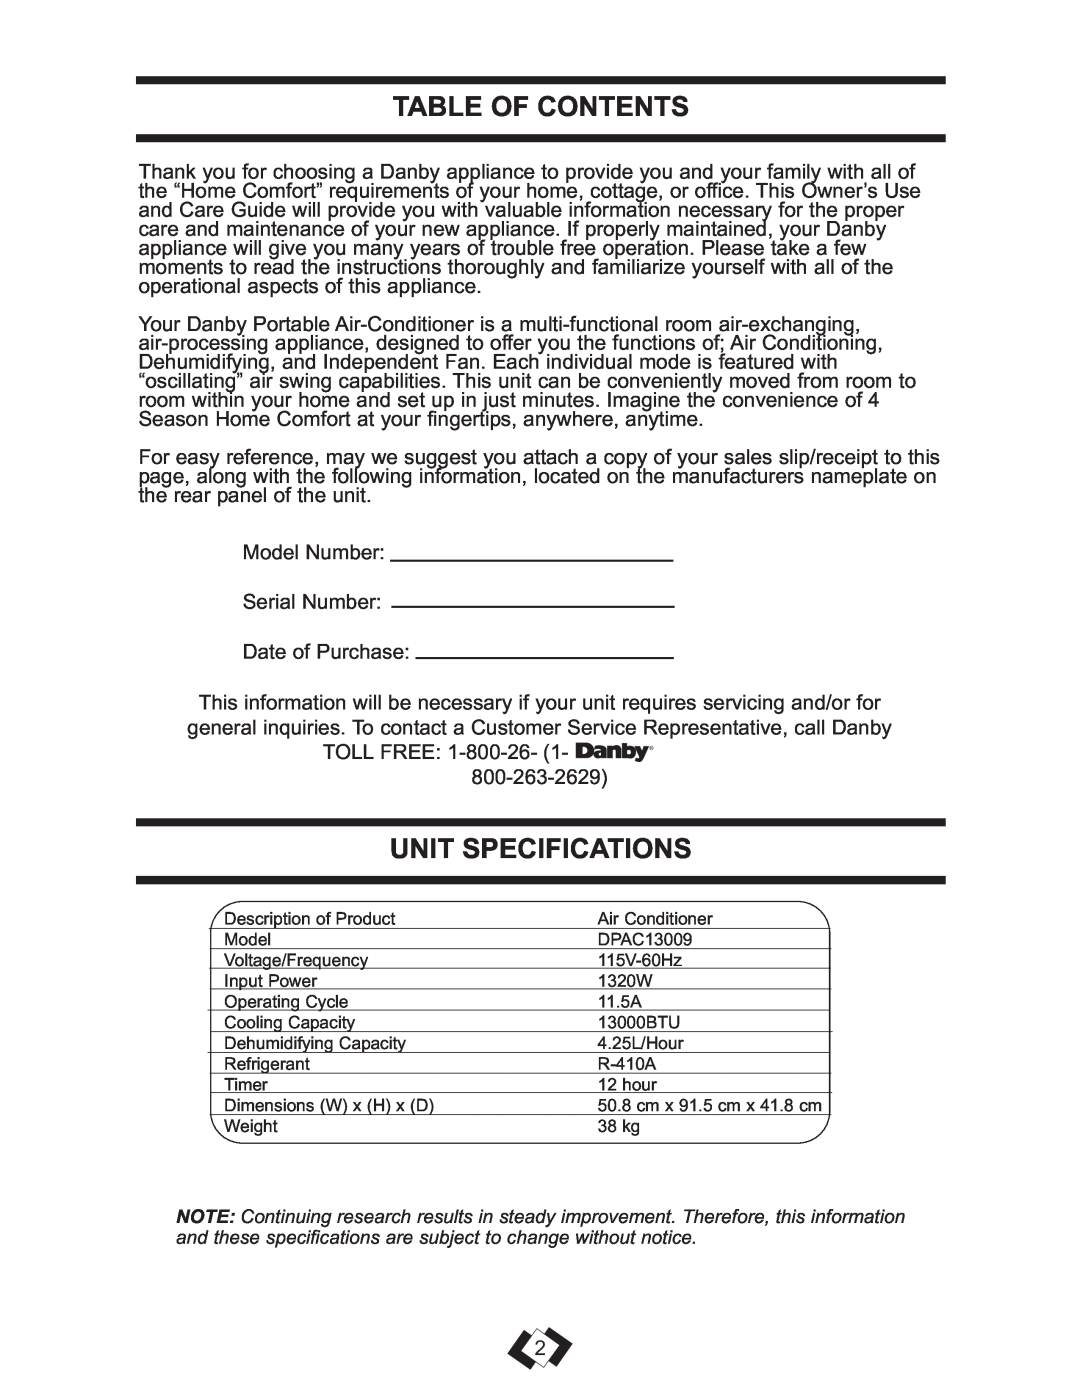 Danby DPAC 13009 operating instructions Unit Specifications, Table Of Contents 